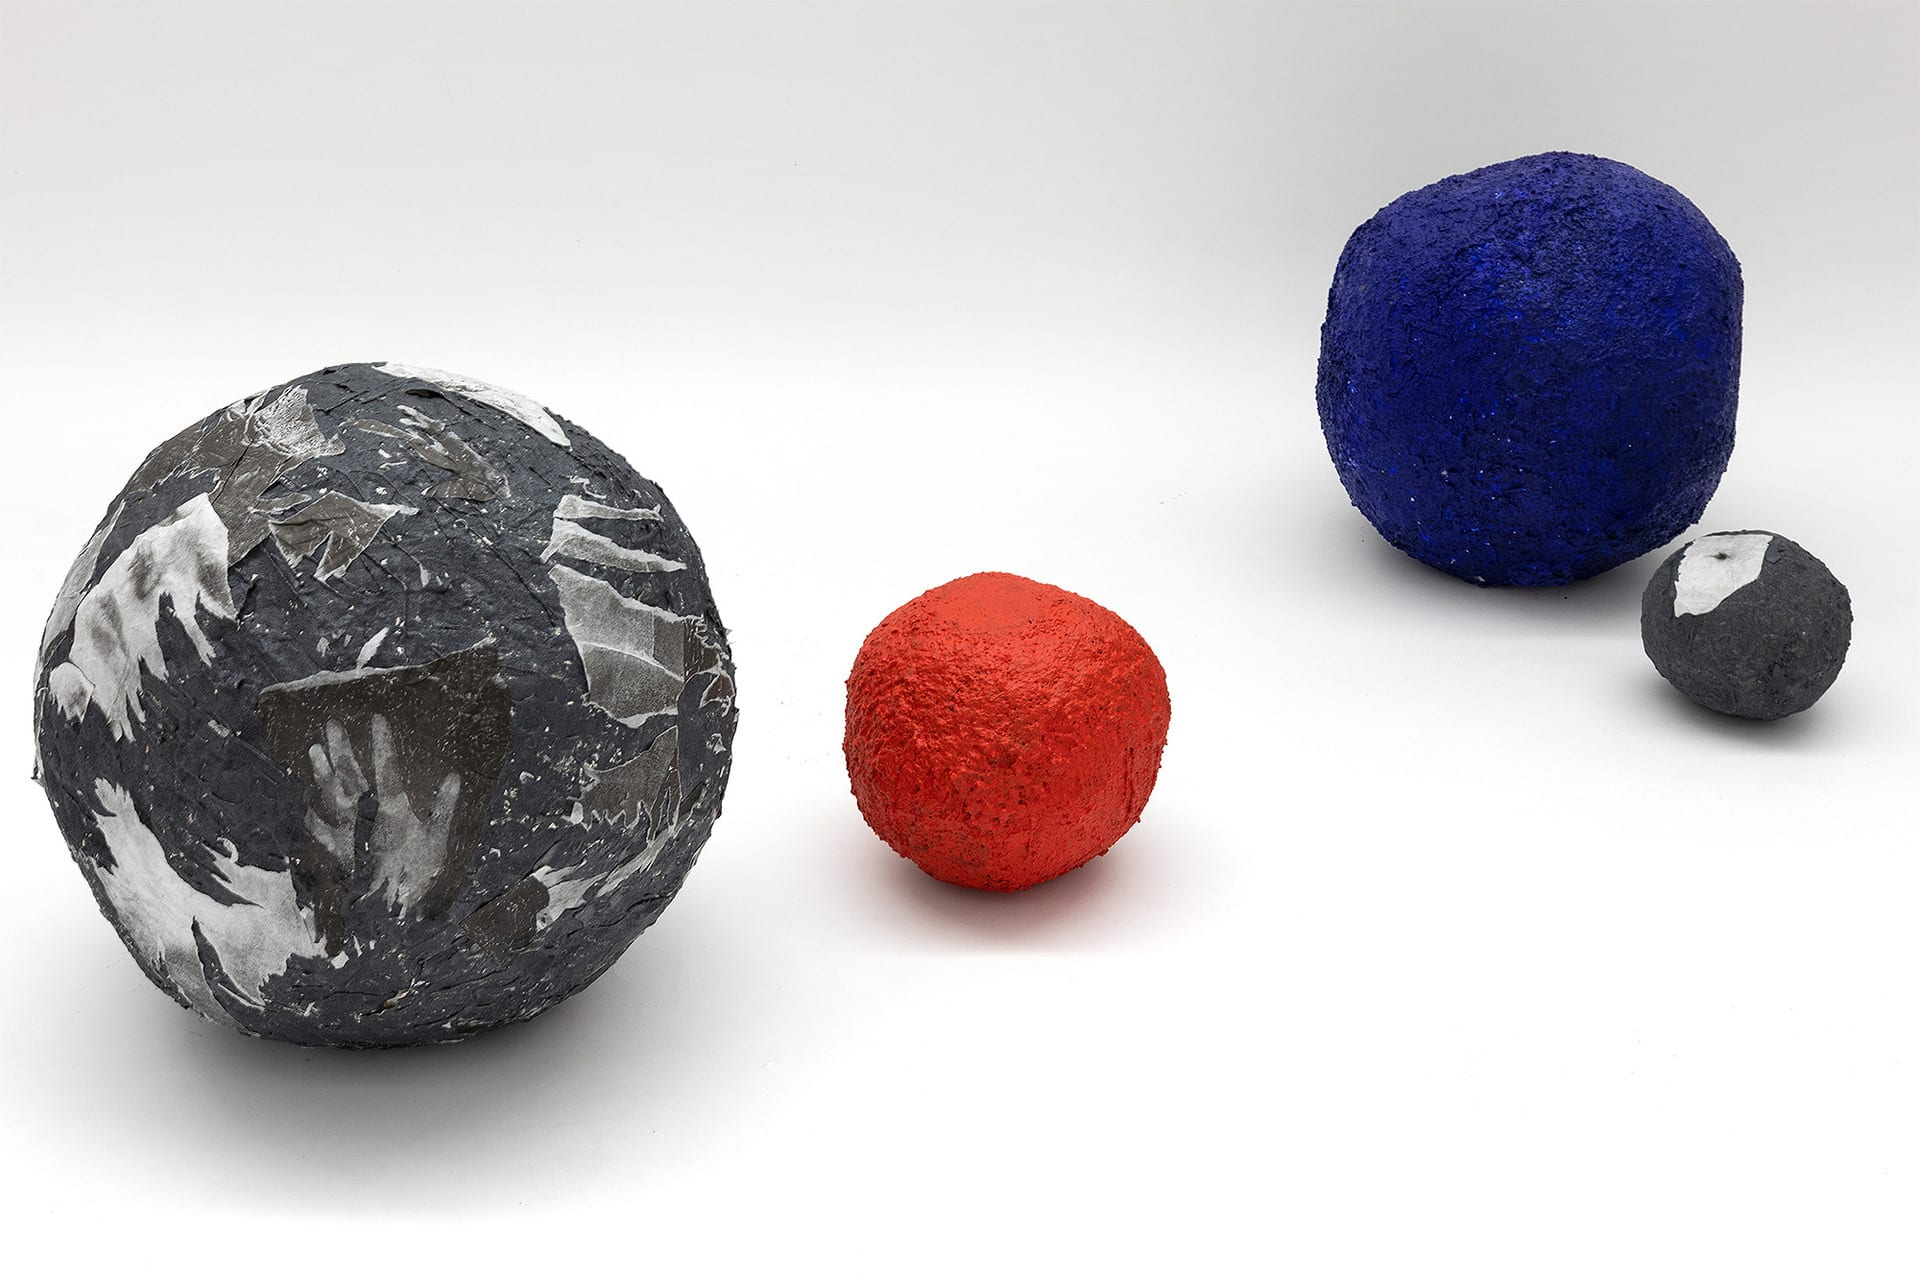 Group of four boulders of different sizes spread on the floor. One red, one blue and two with lithographs on their surface.